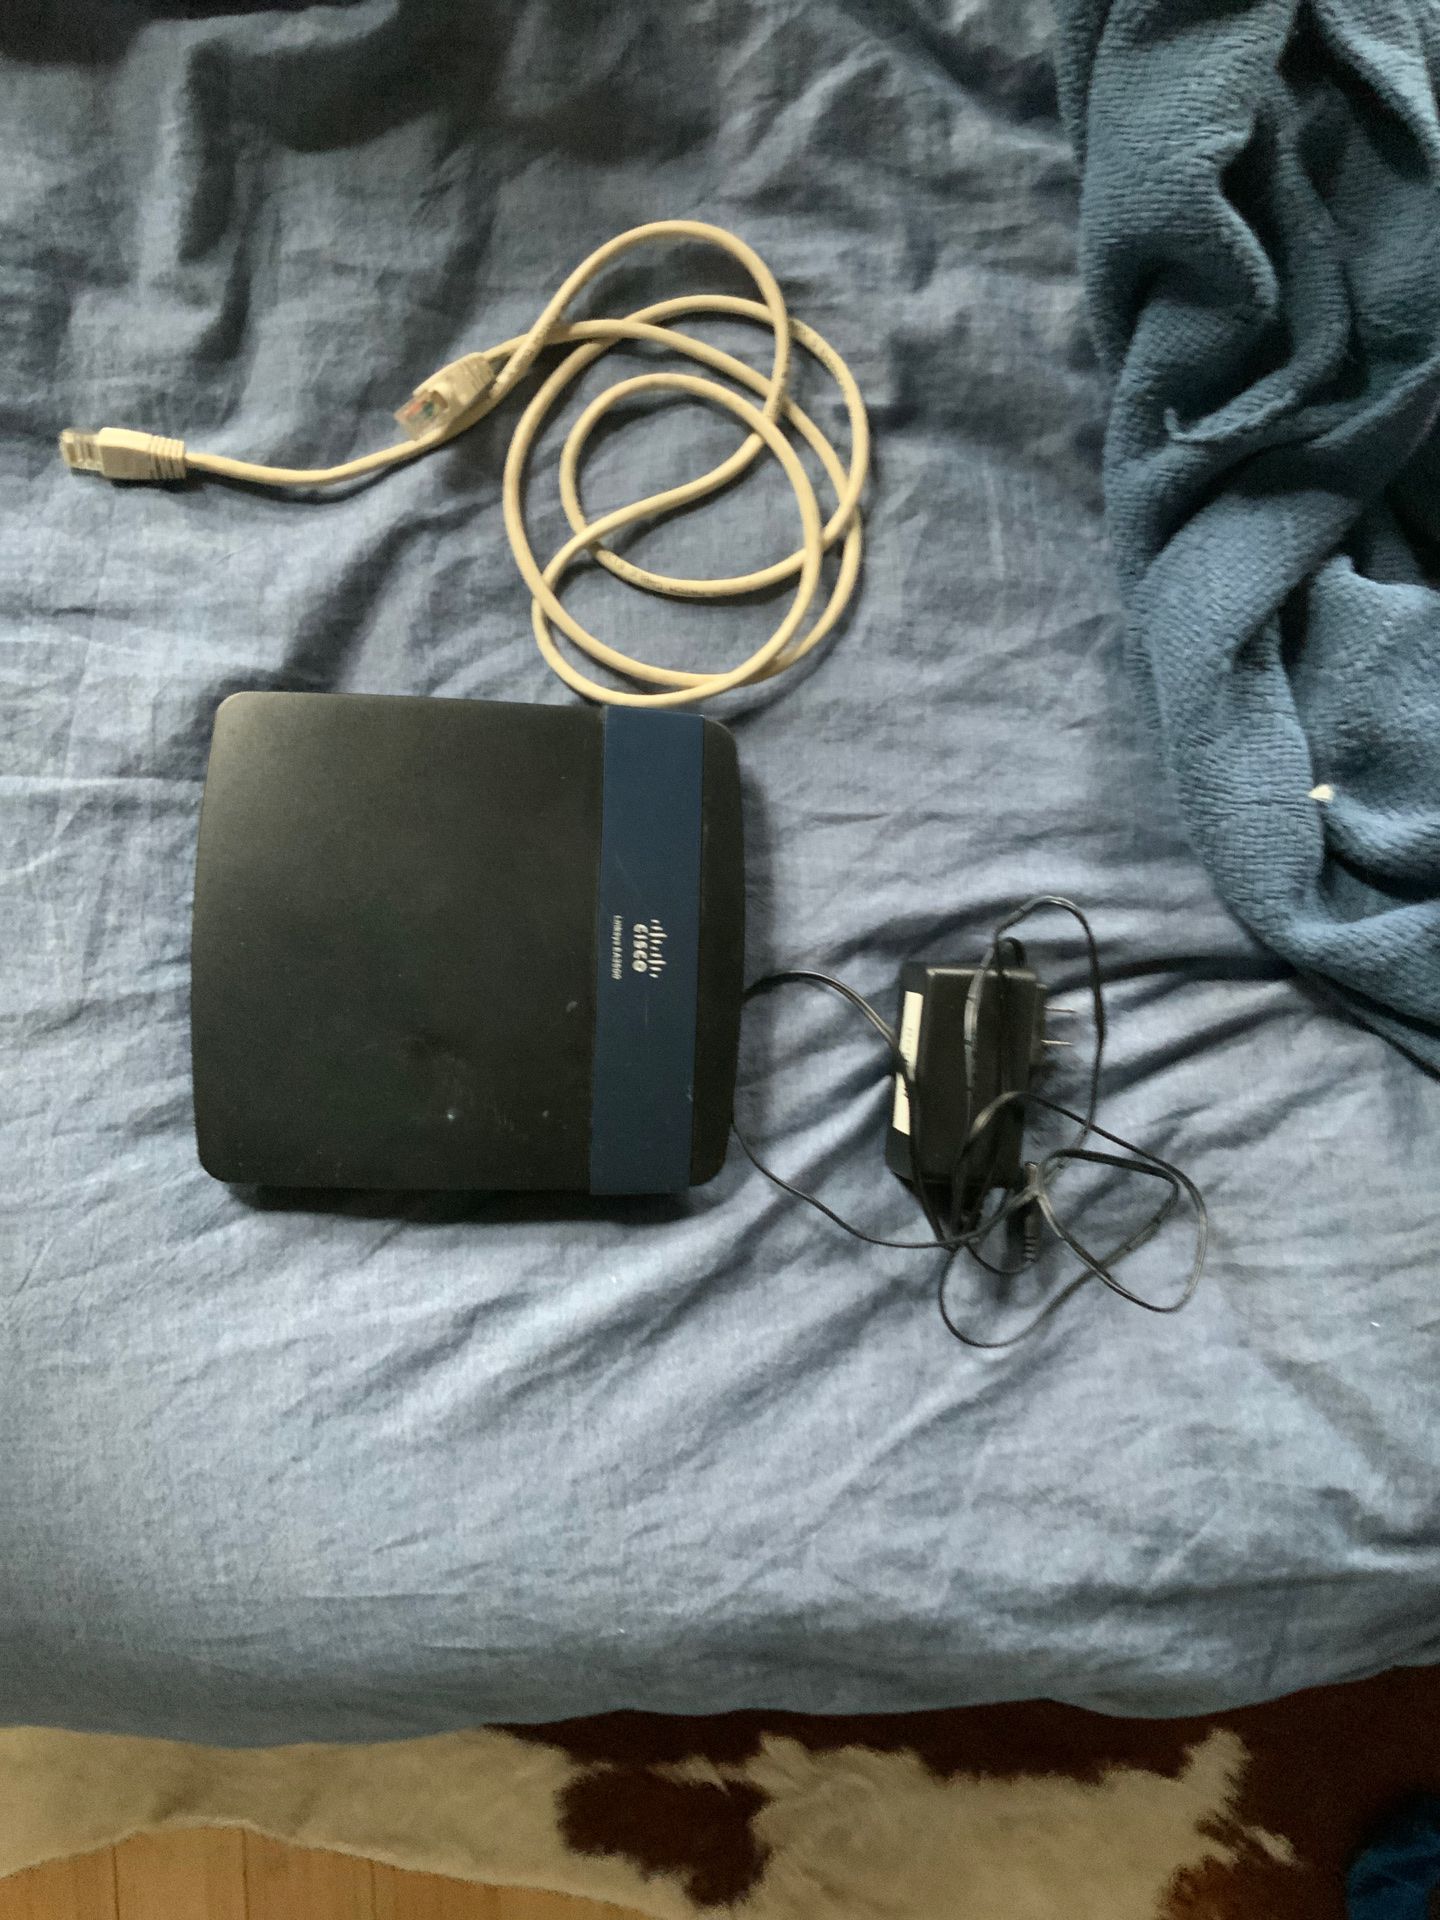 Cisco Linksys EA3500 N750 Dual-Band WiFi Router With Adapter And Ethernet Cord